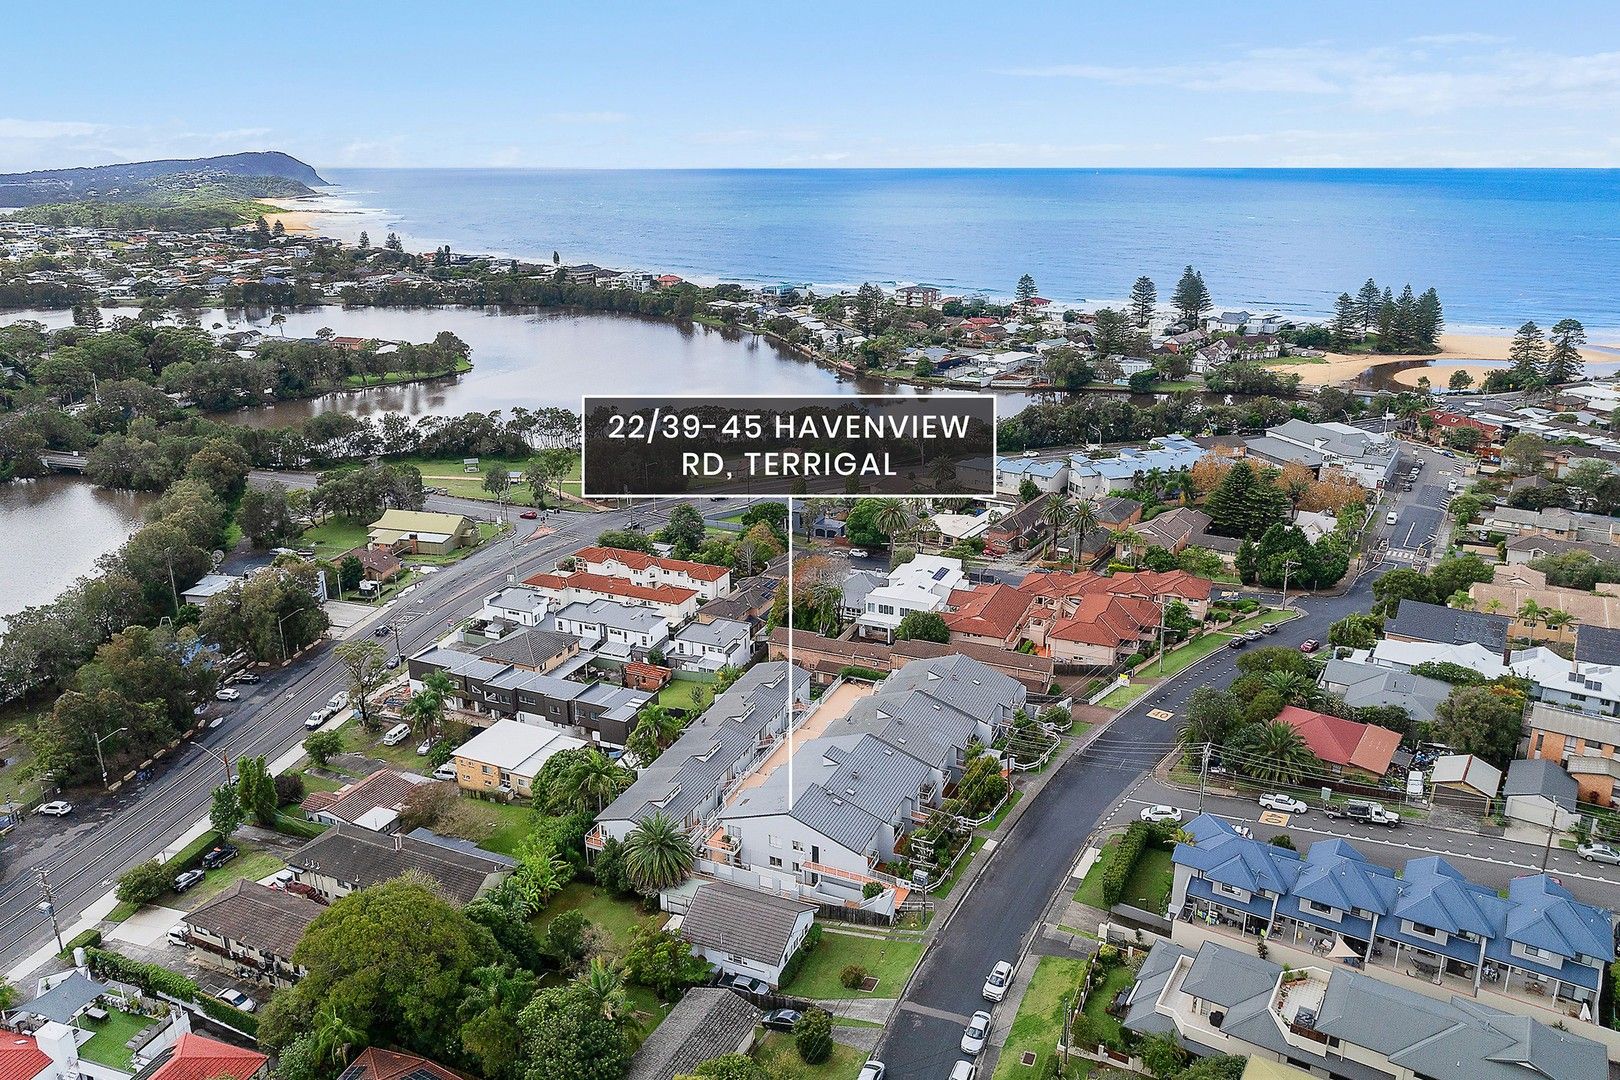 22/39-45 Havenview Road, Terrigal NSW 2260, Image 0